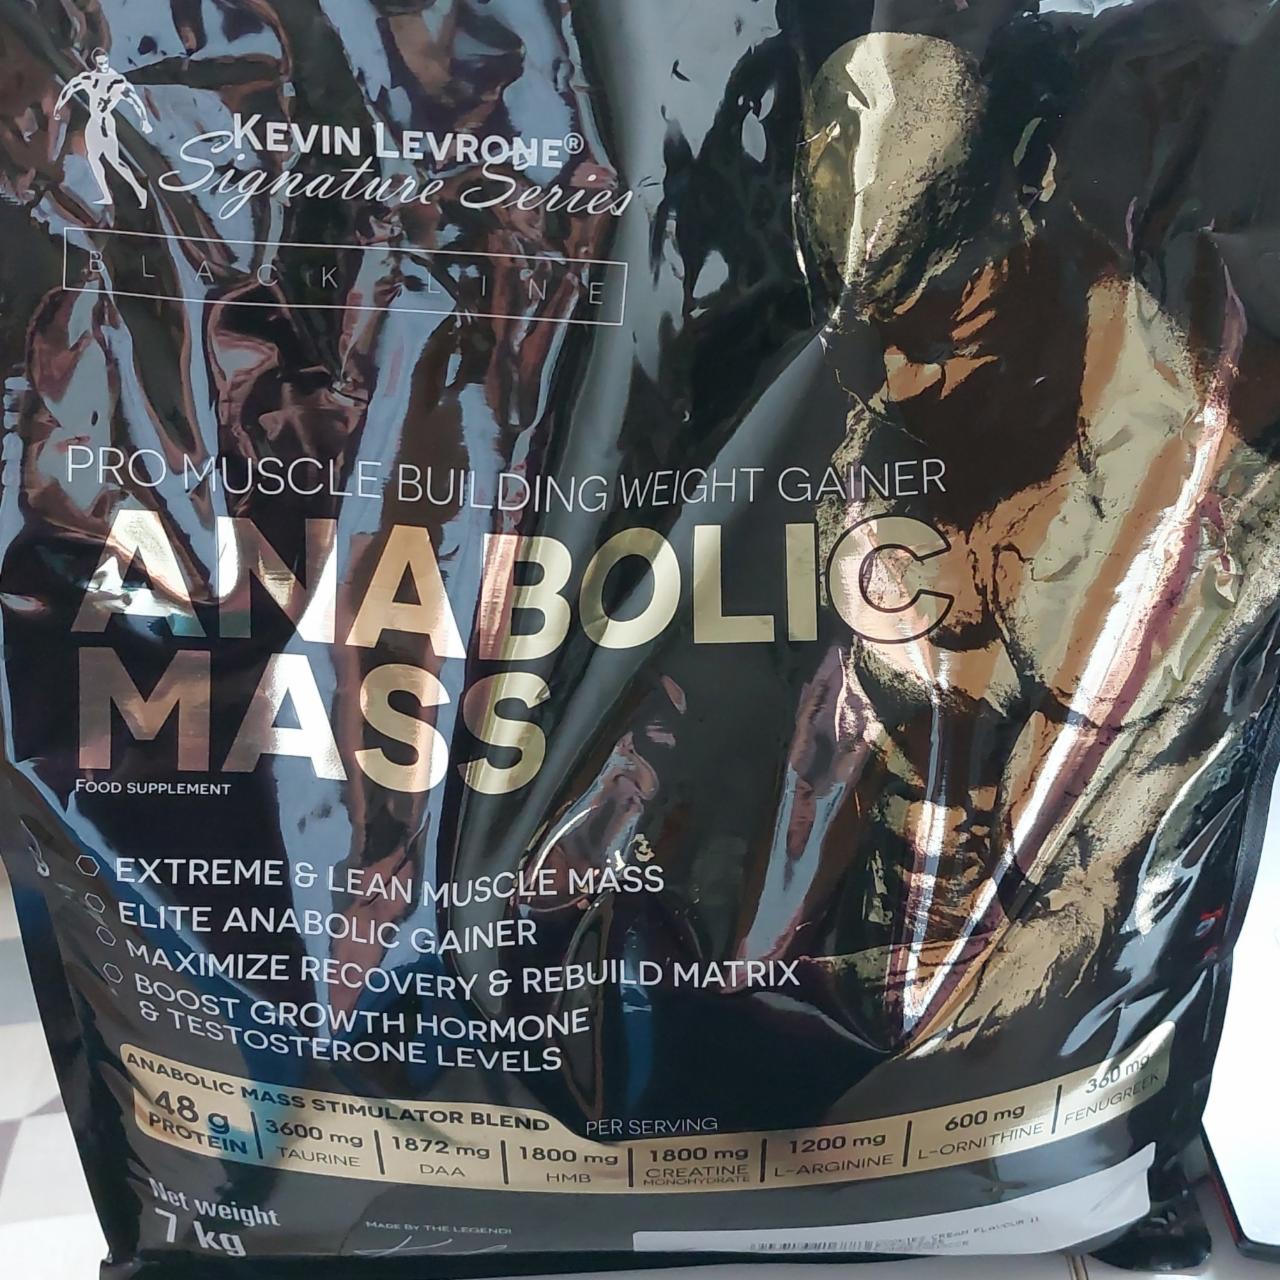 Fotografie - Anabolic mass cookies cream flavour Kevin Levrone